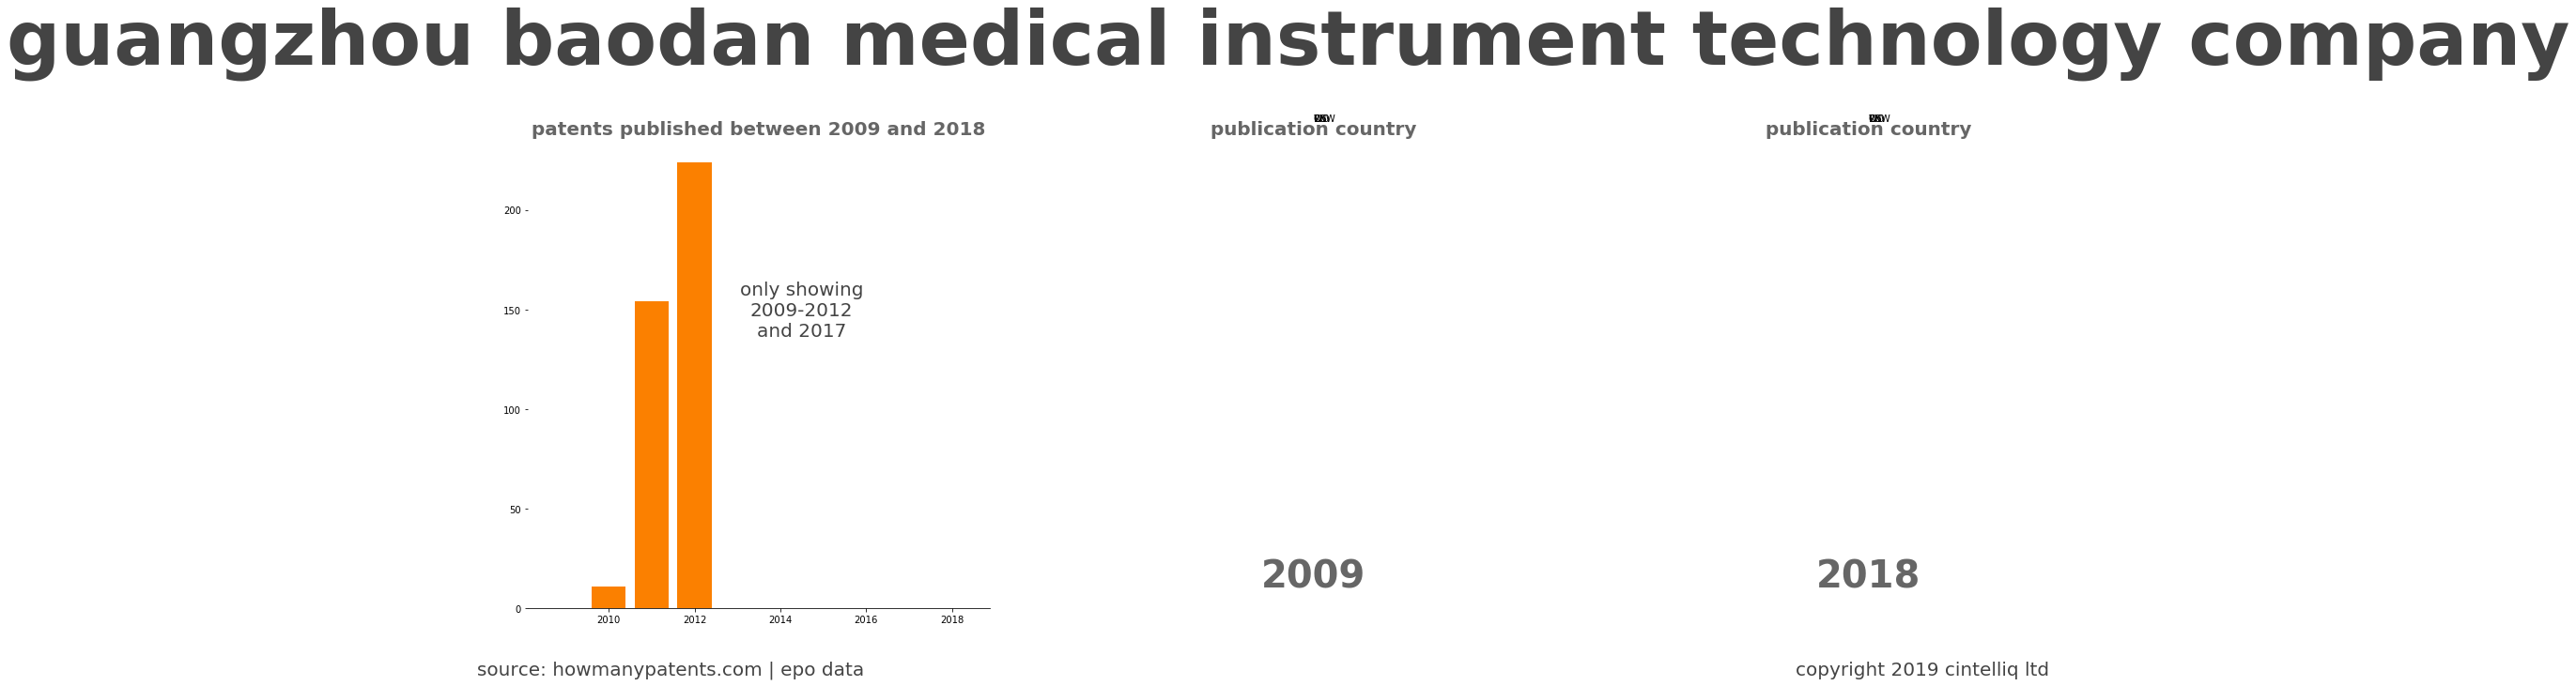 summary of patents for Guangzhou Baodan Medical Instrument Technology Company